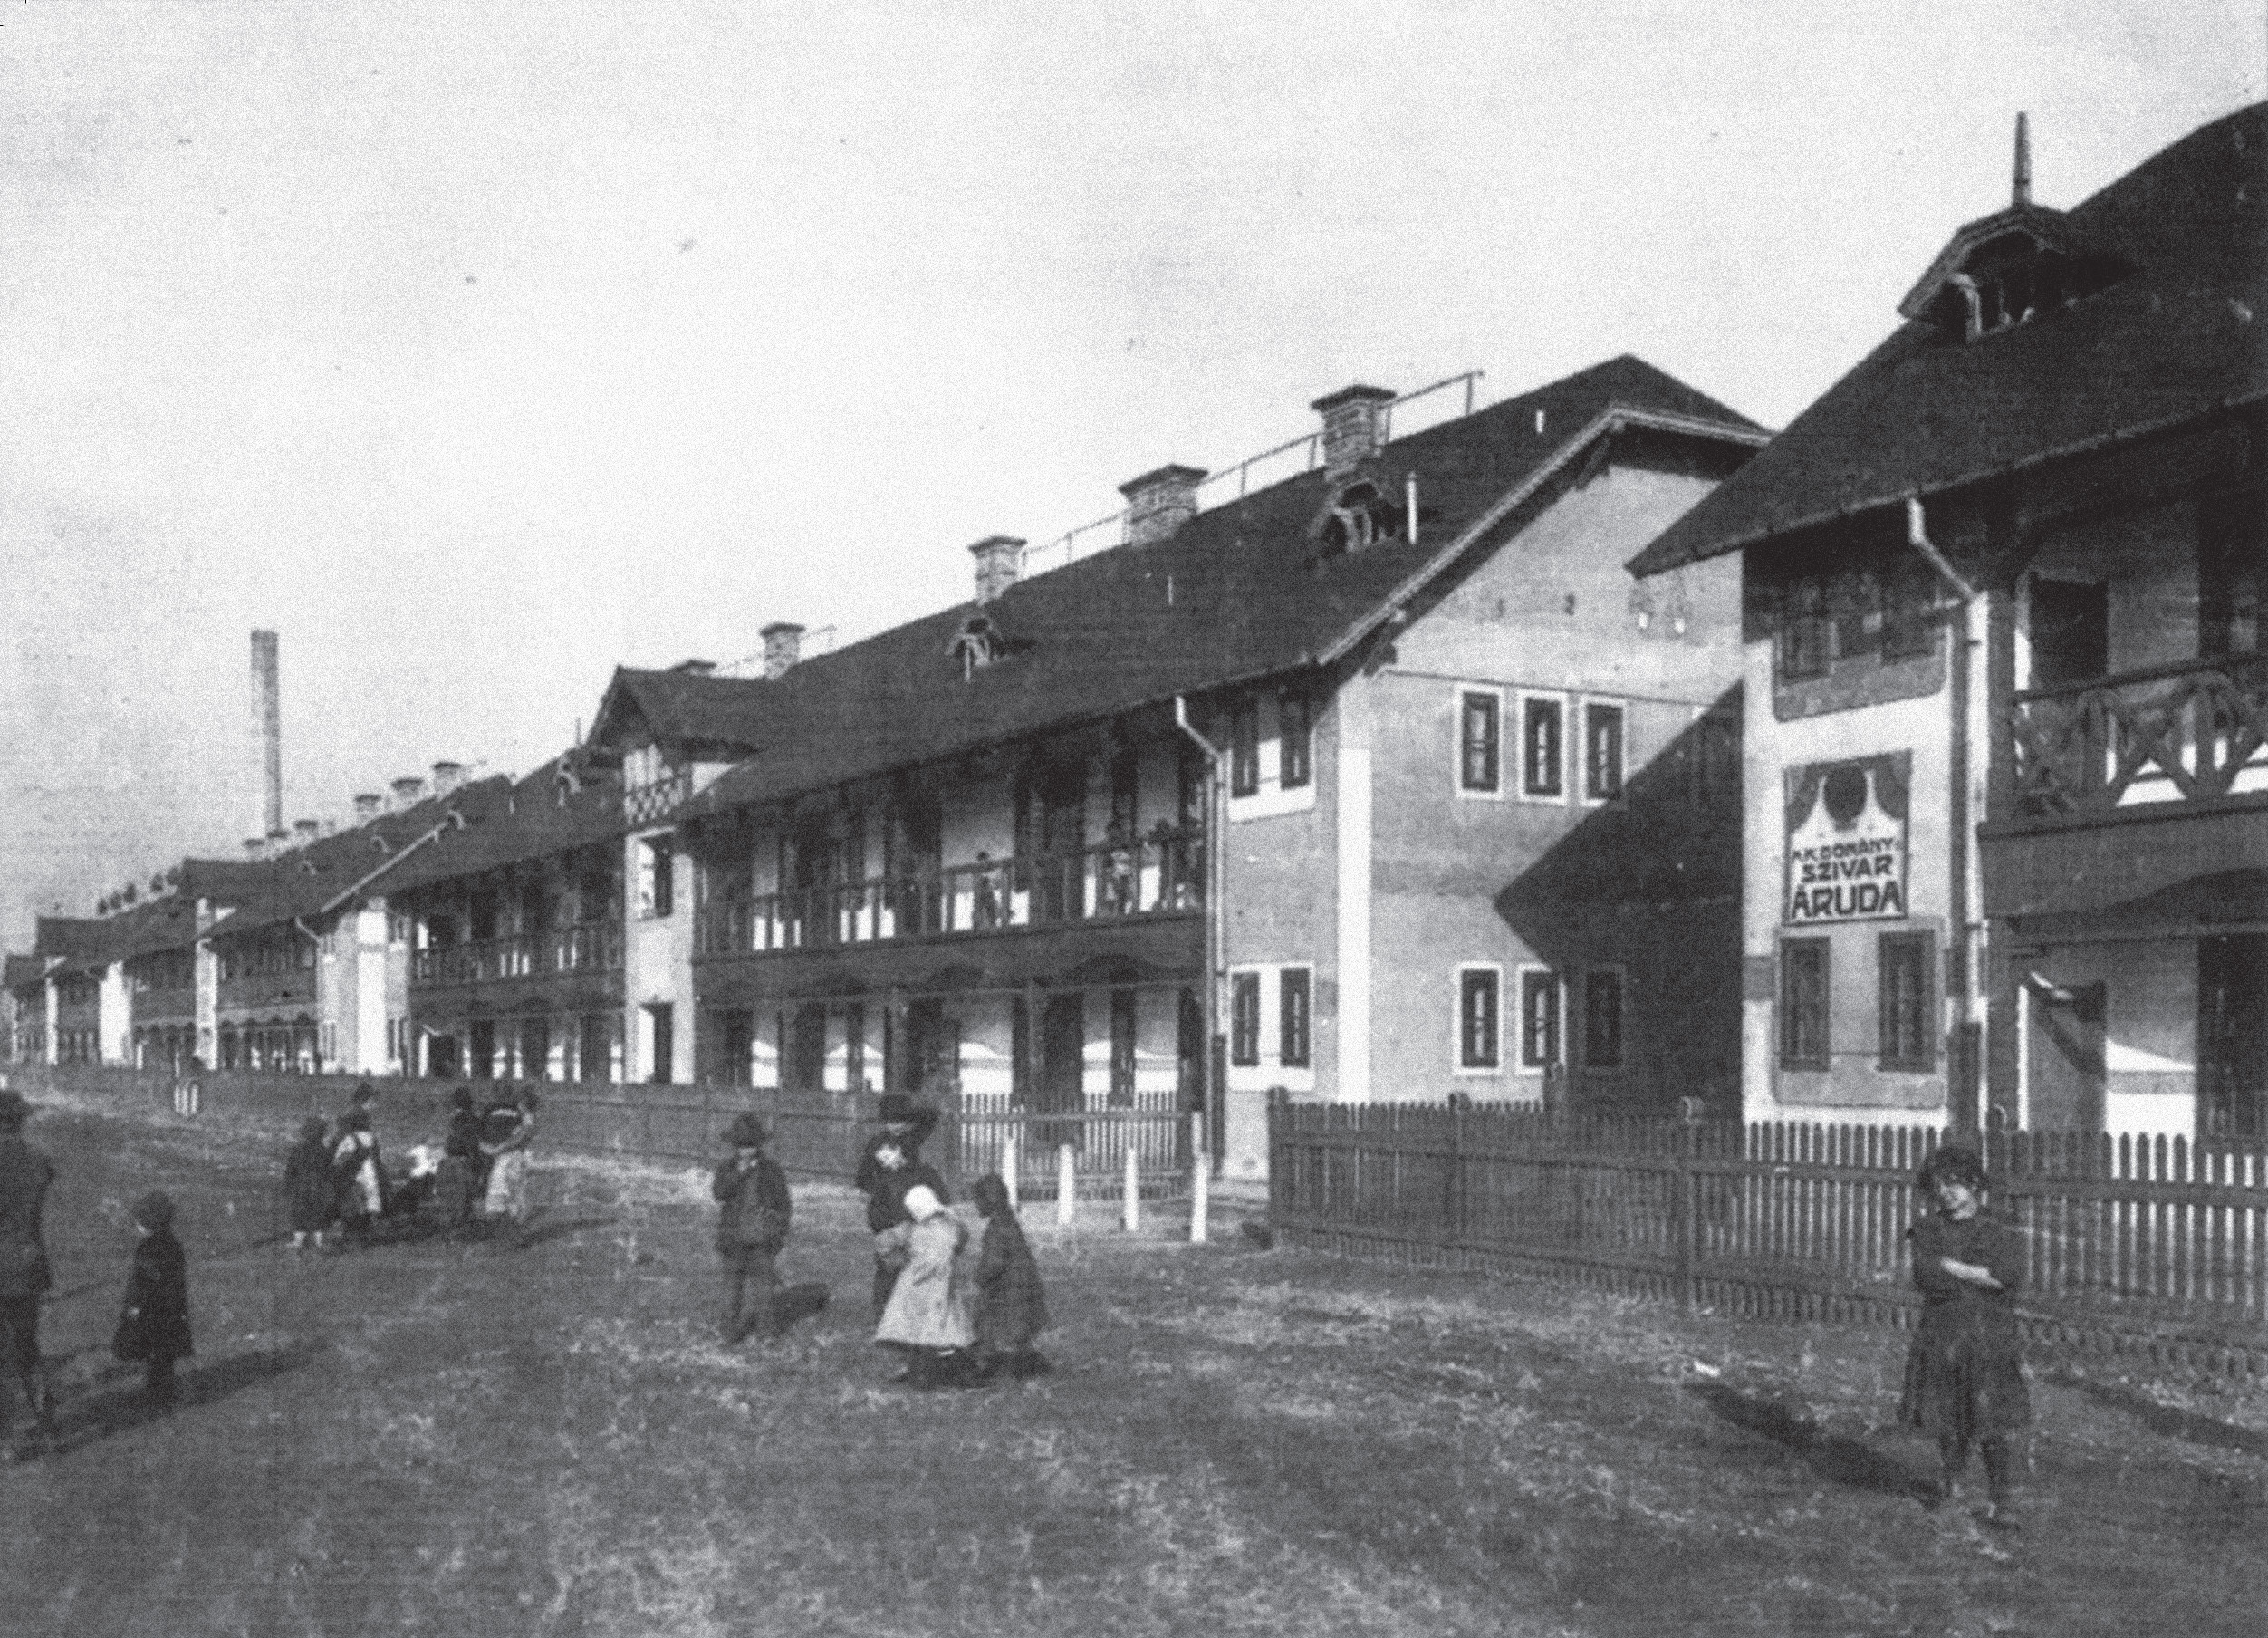 Room, Kitchen, Kitchen Garden. The History of the Municipal Housing Project in Budapest, 1909 – 1913